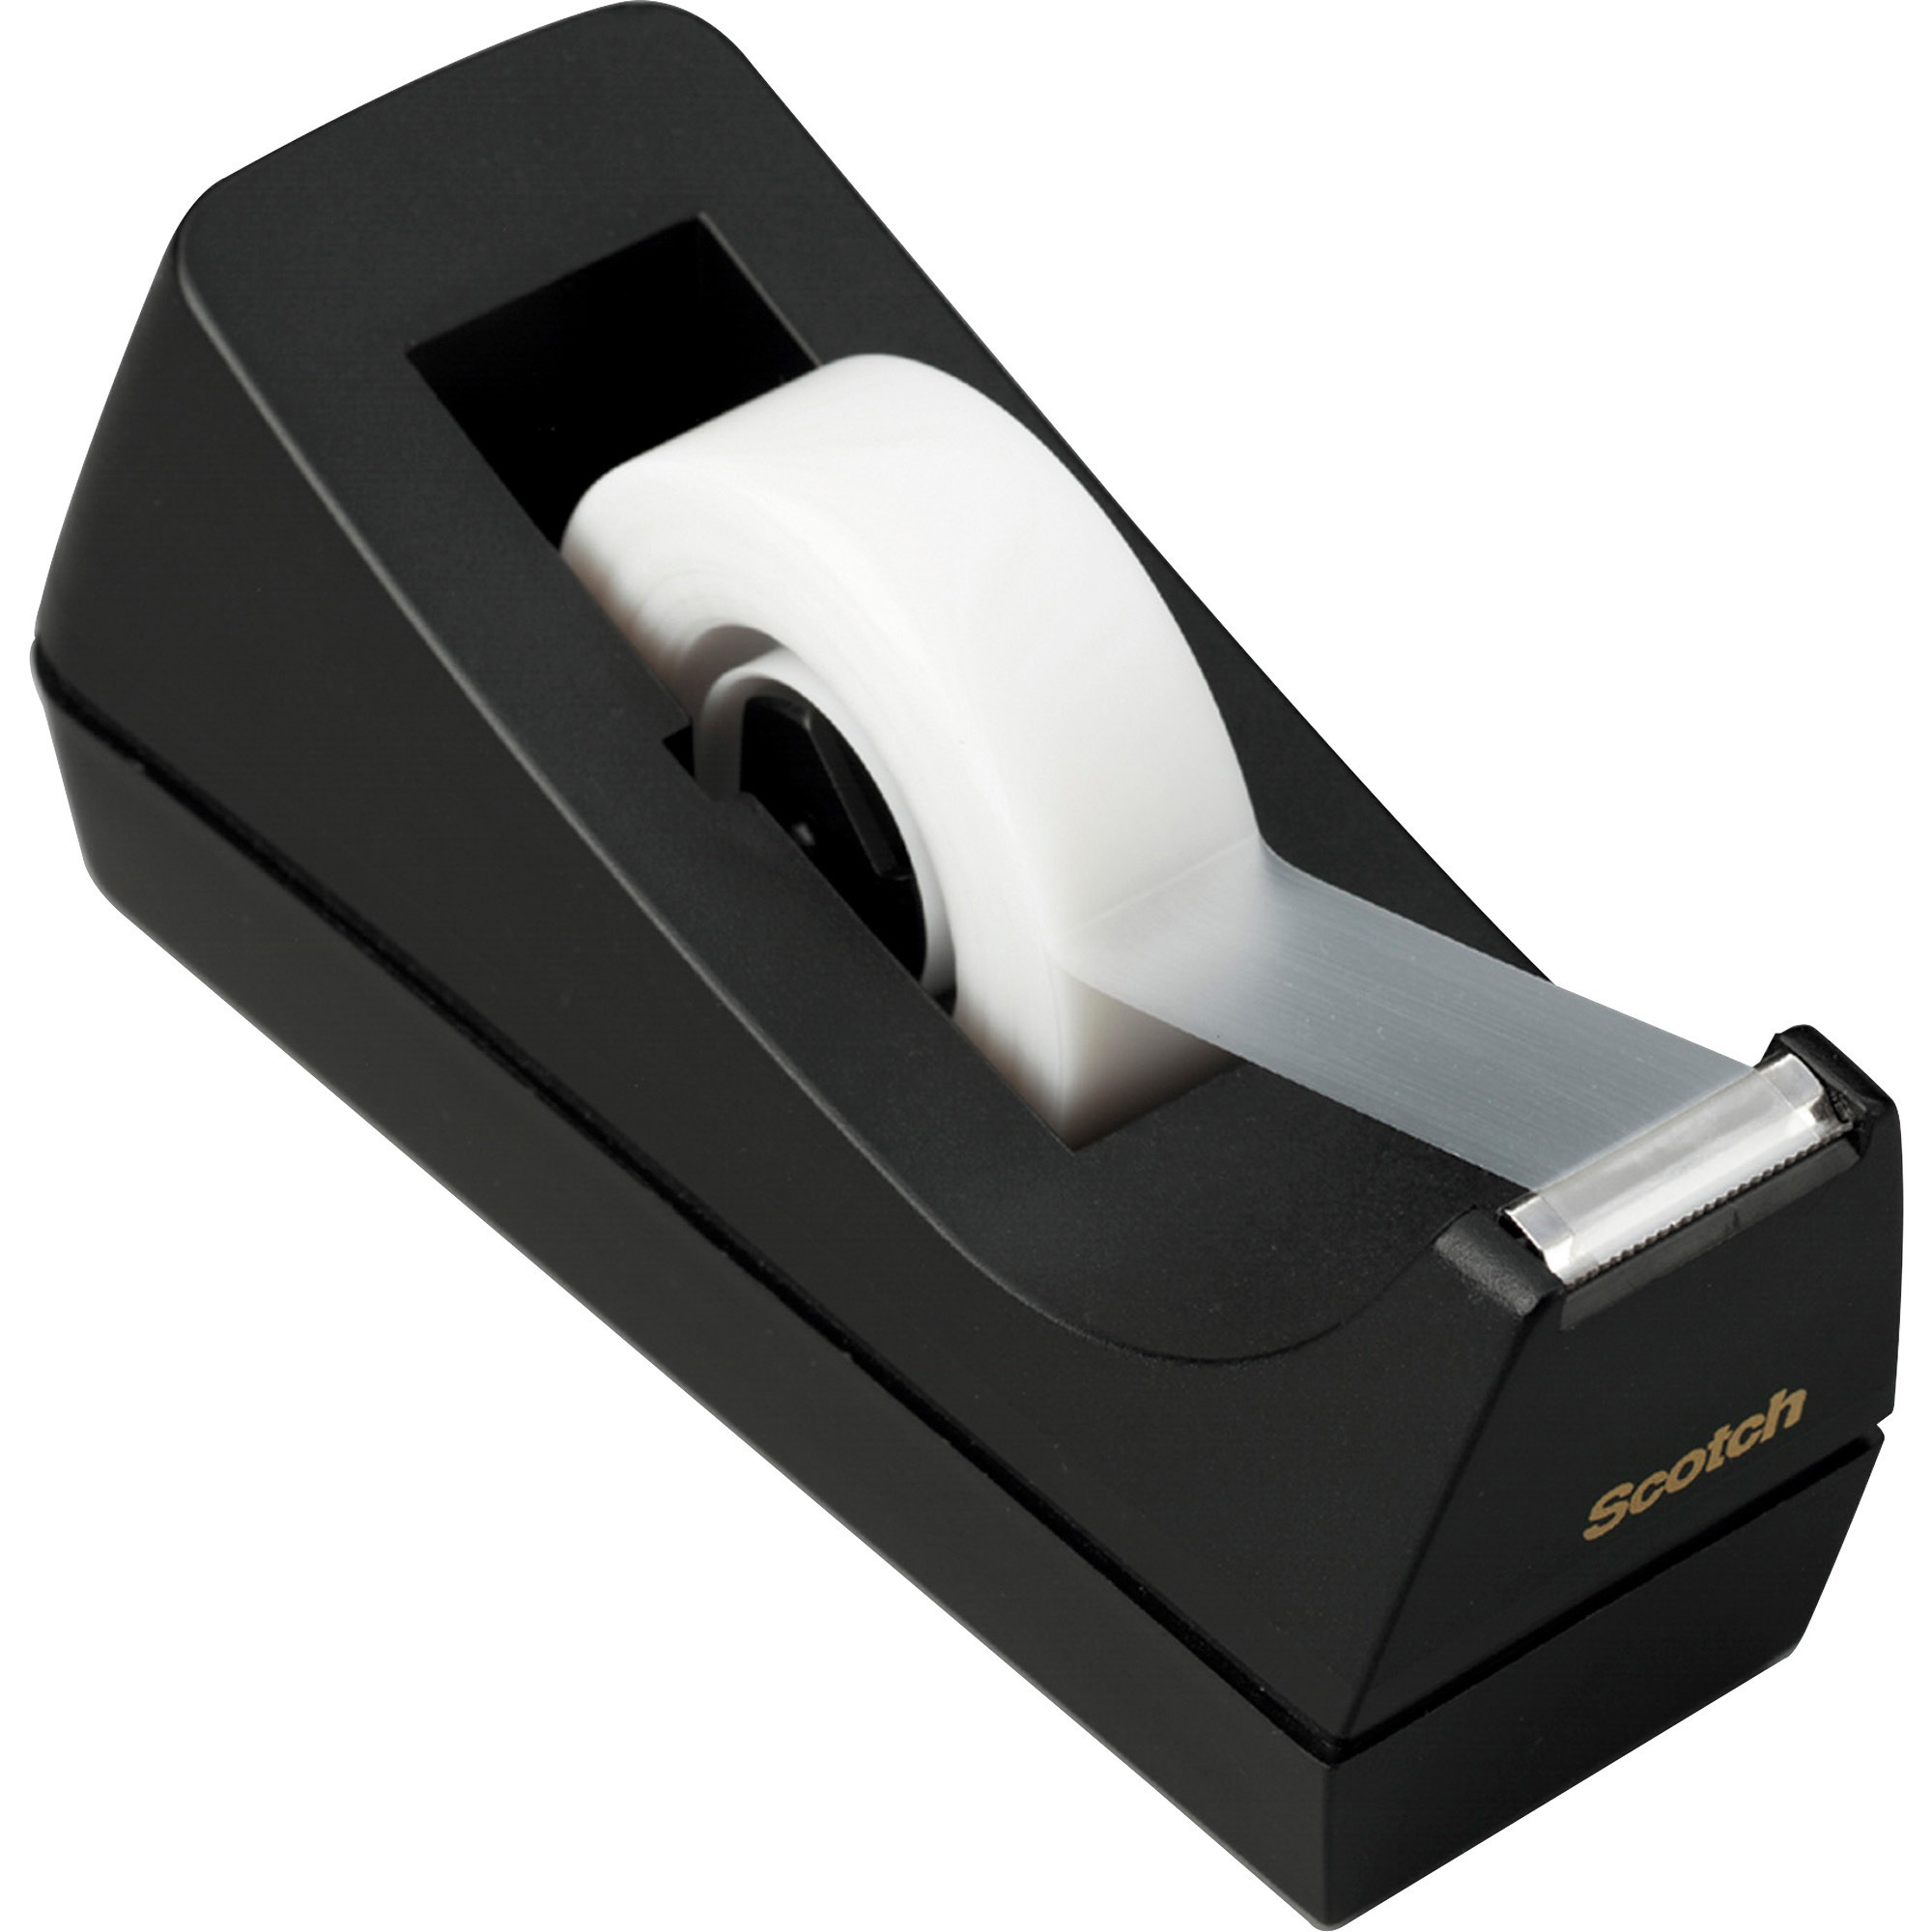  School Smart Tape Dispenser with Interchangeable 1 and 3 Inch  Cores, Black - 081904 : Office Products